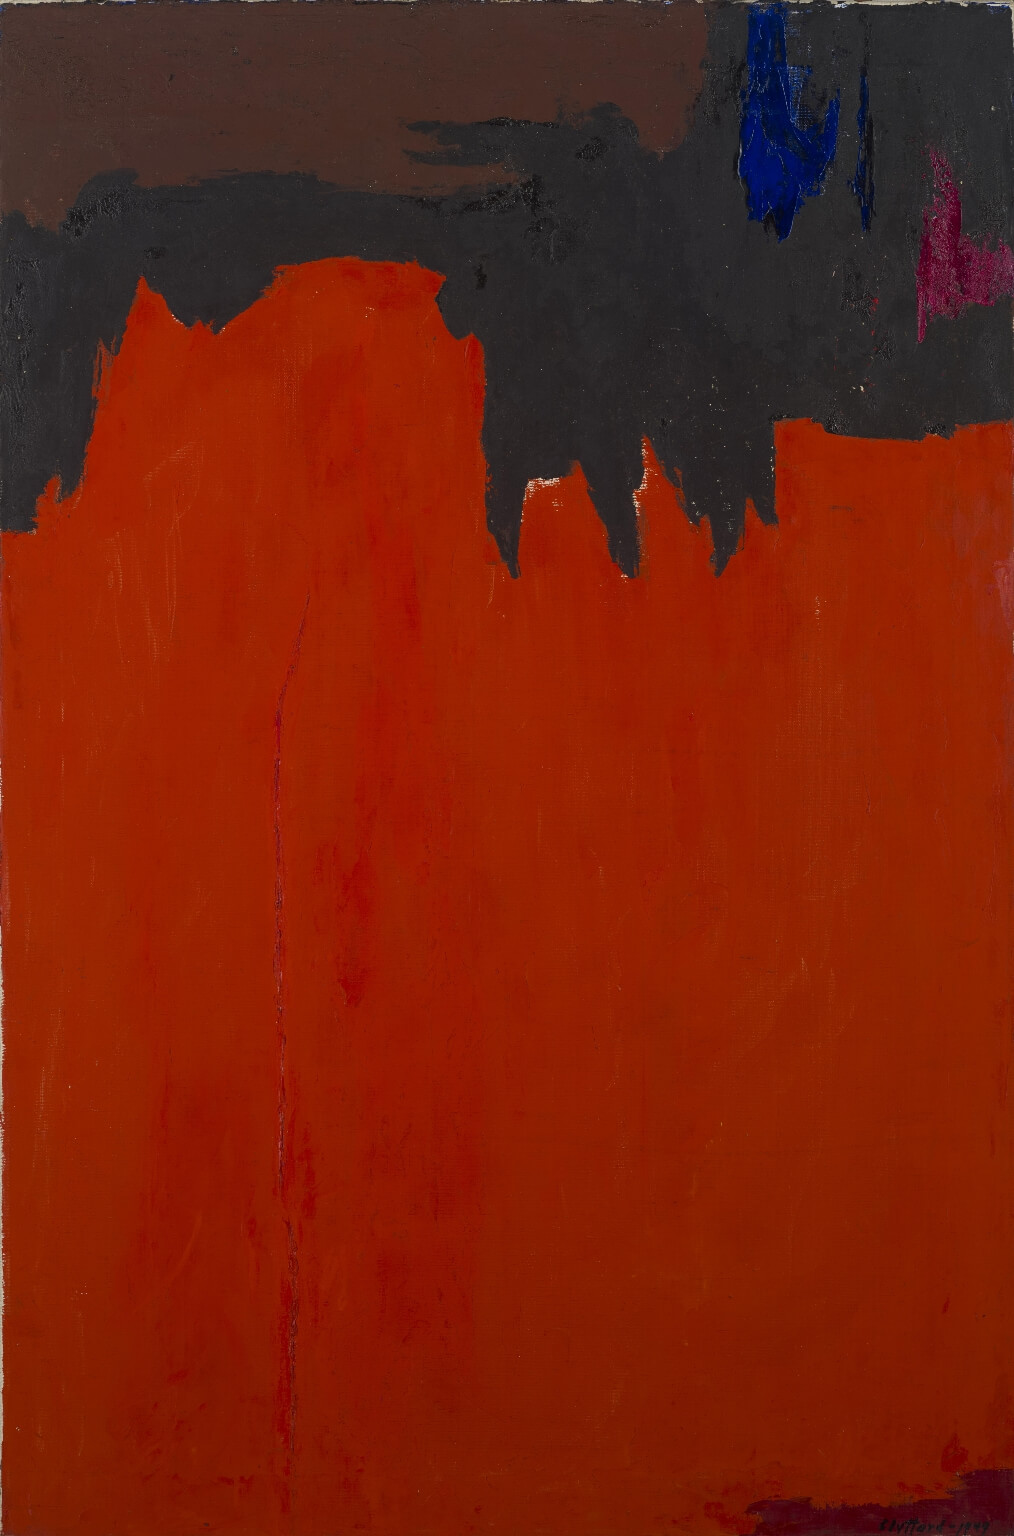 Vertical abstract painting with an orangish red on the bottom two-thirds, with an uneven top, and black, brown, and blue above it